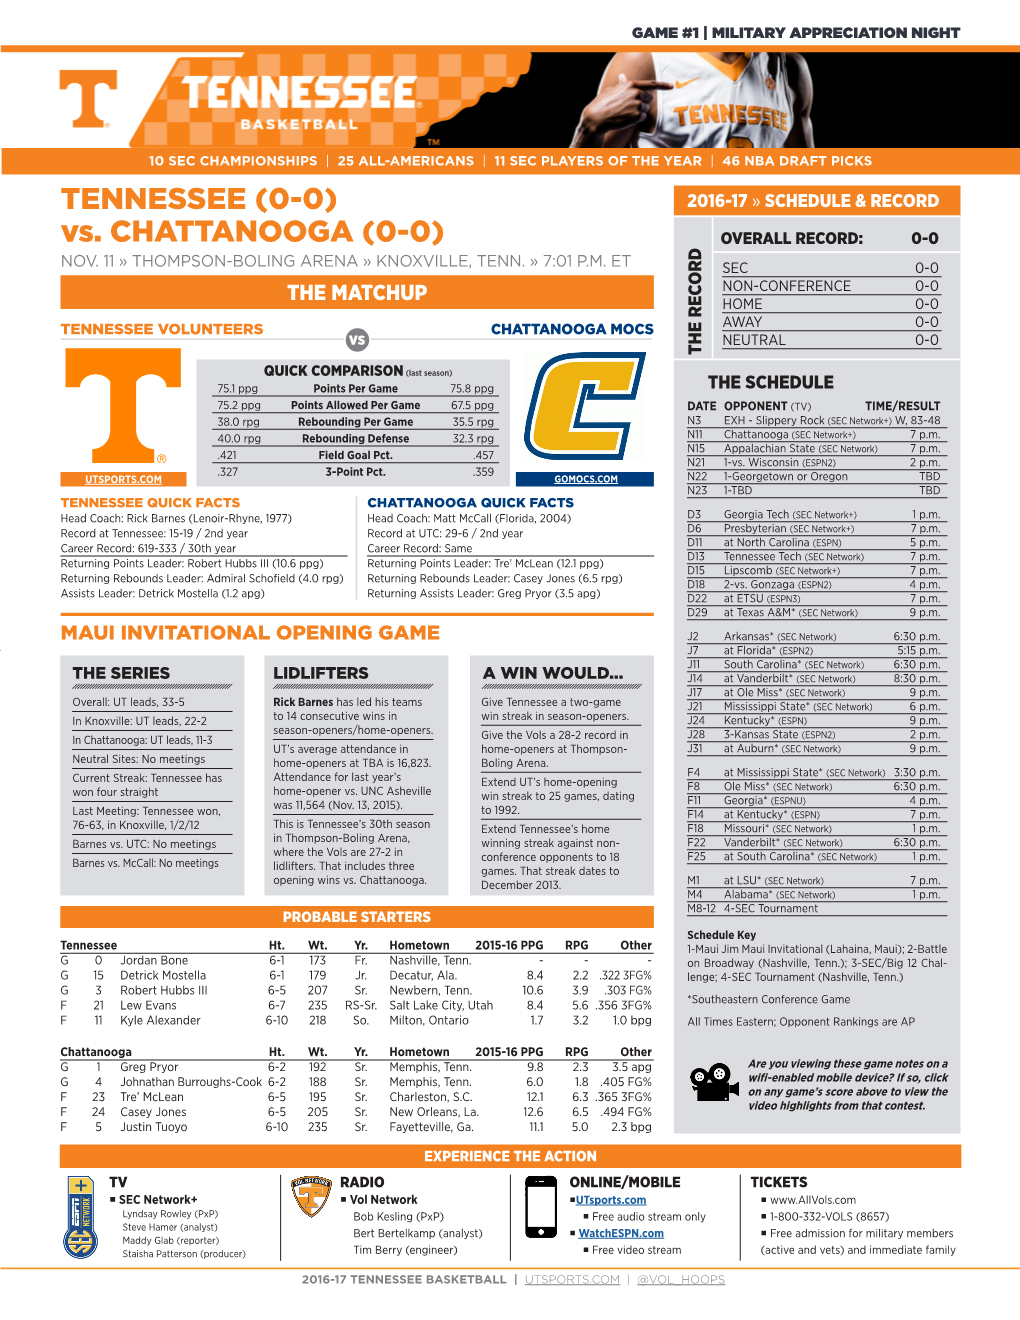 TENNESSEE (0-0) Vs. CHATTANOOGA (0-0)